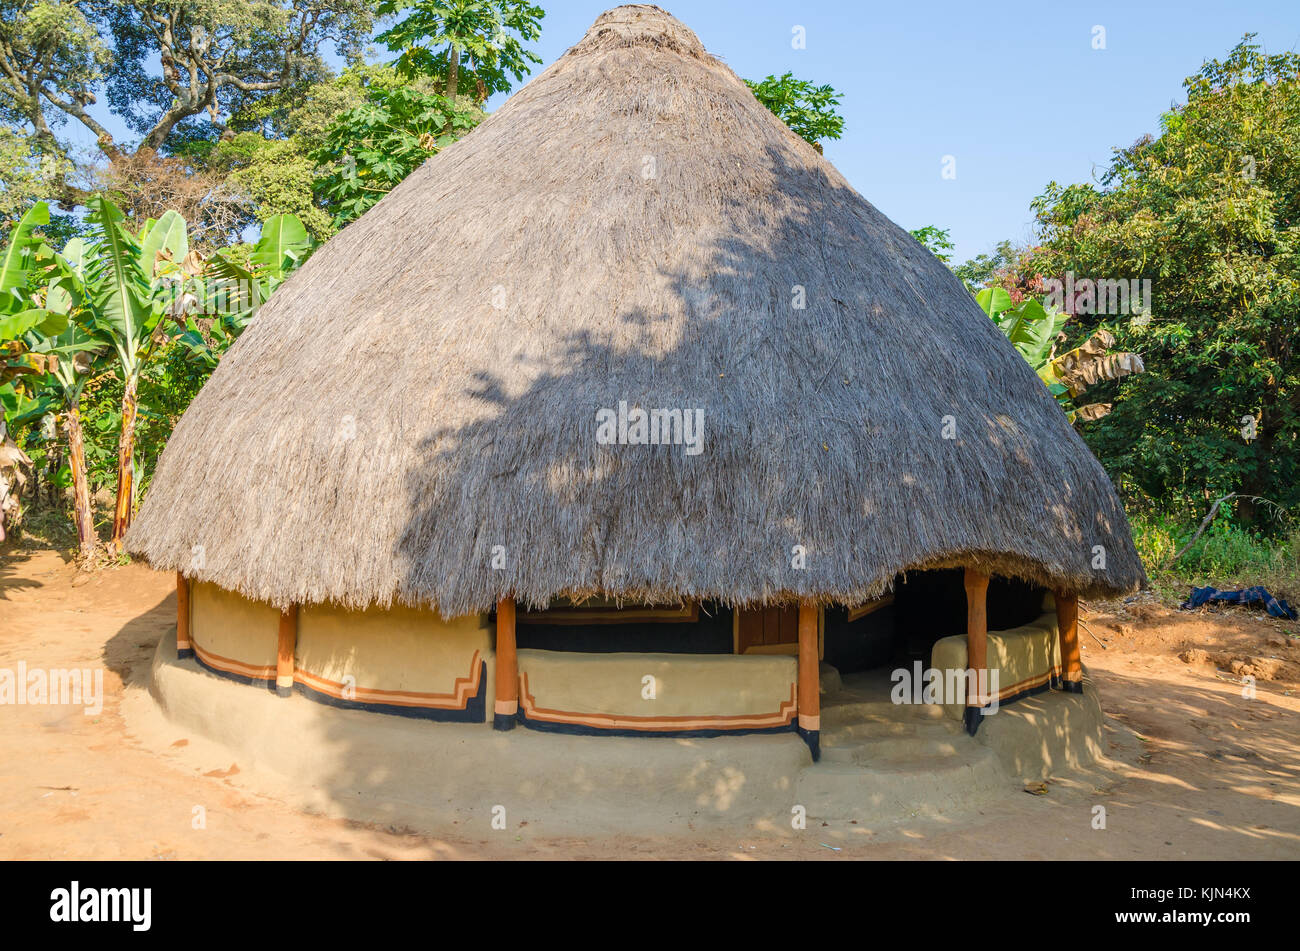 Beautiful and colorful traditional thatched round mud and clay hut in rural village of Guinea Bissau, West Africa Stock Photo